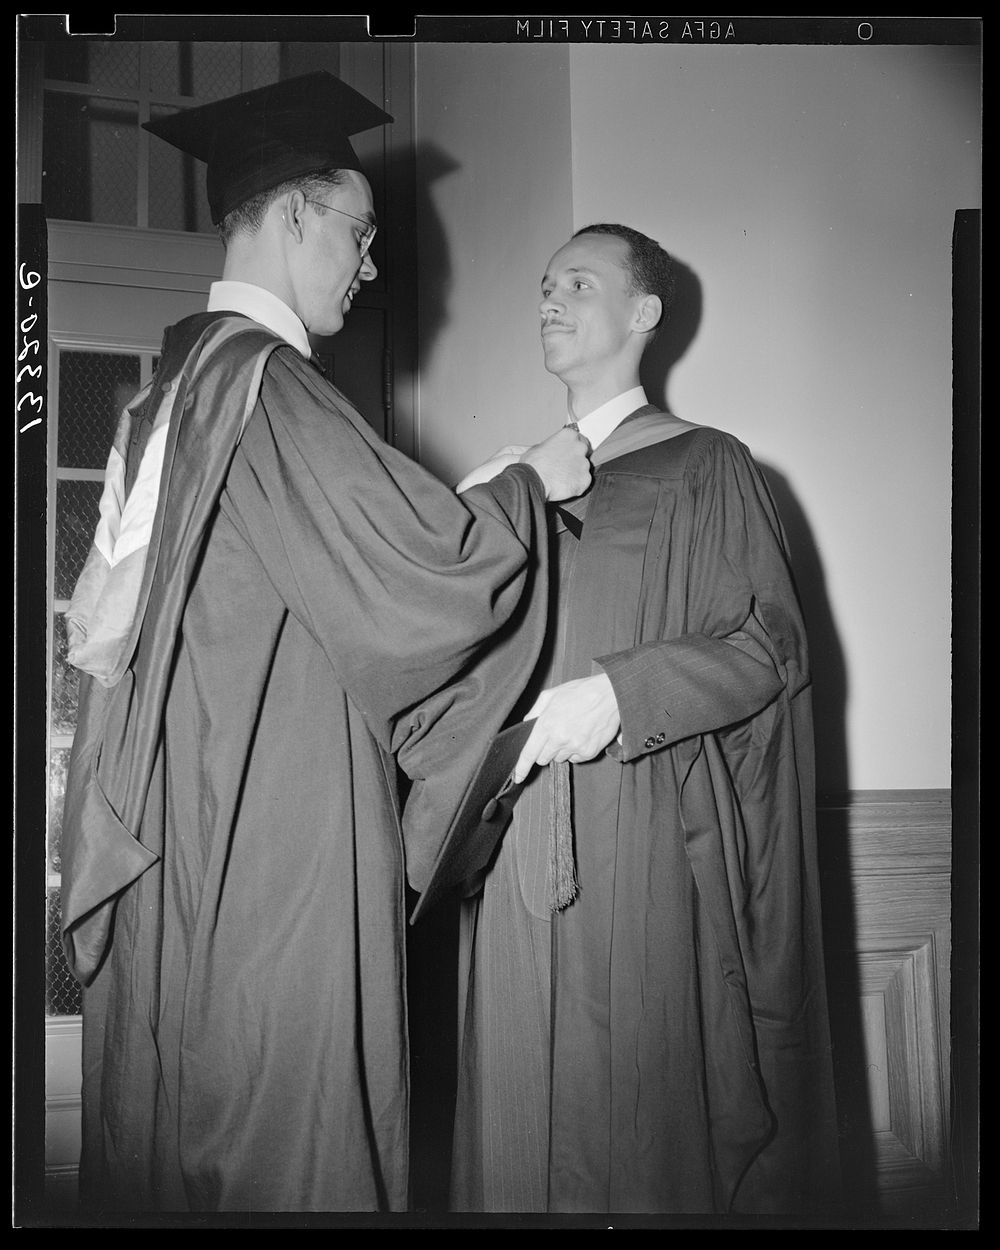 Washington, D.C. Young men preparing to receive degrees from Howard University. Sourced from the Library of Congress.